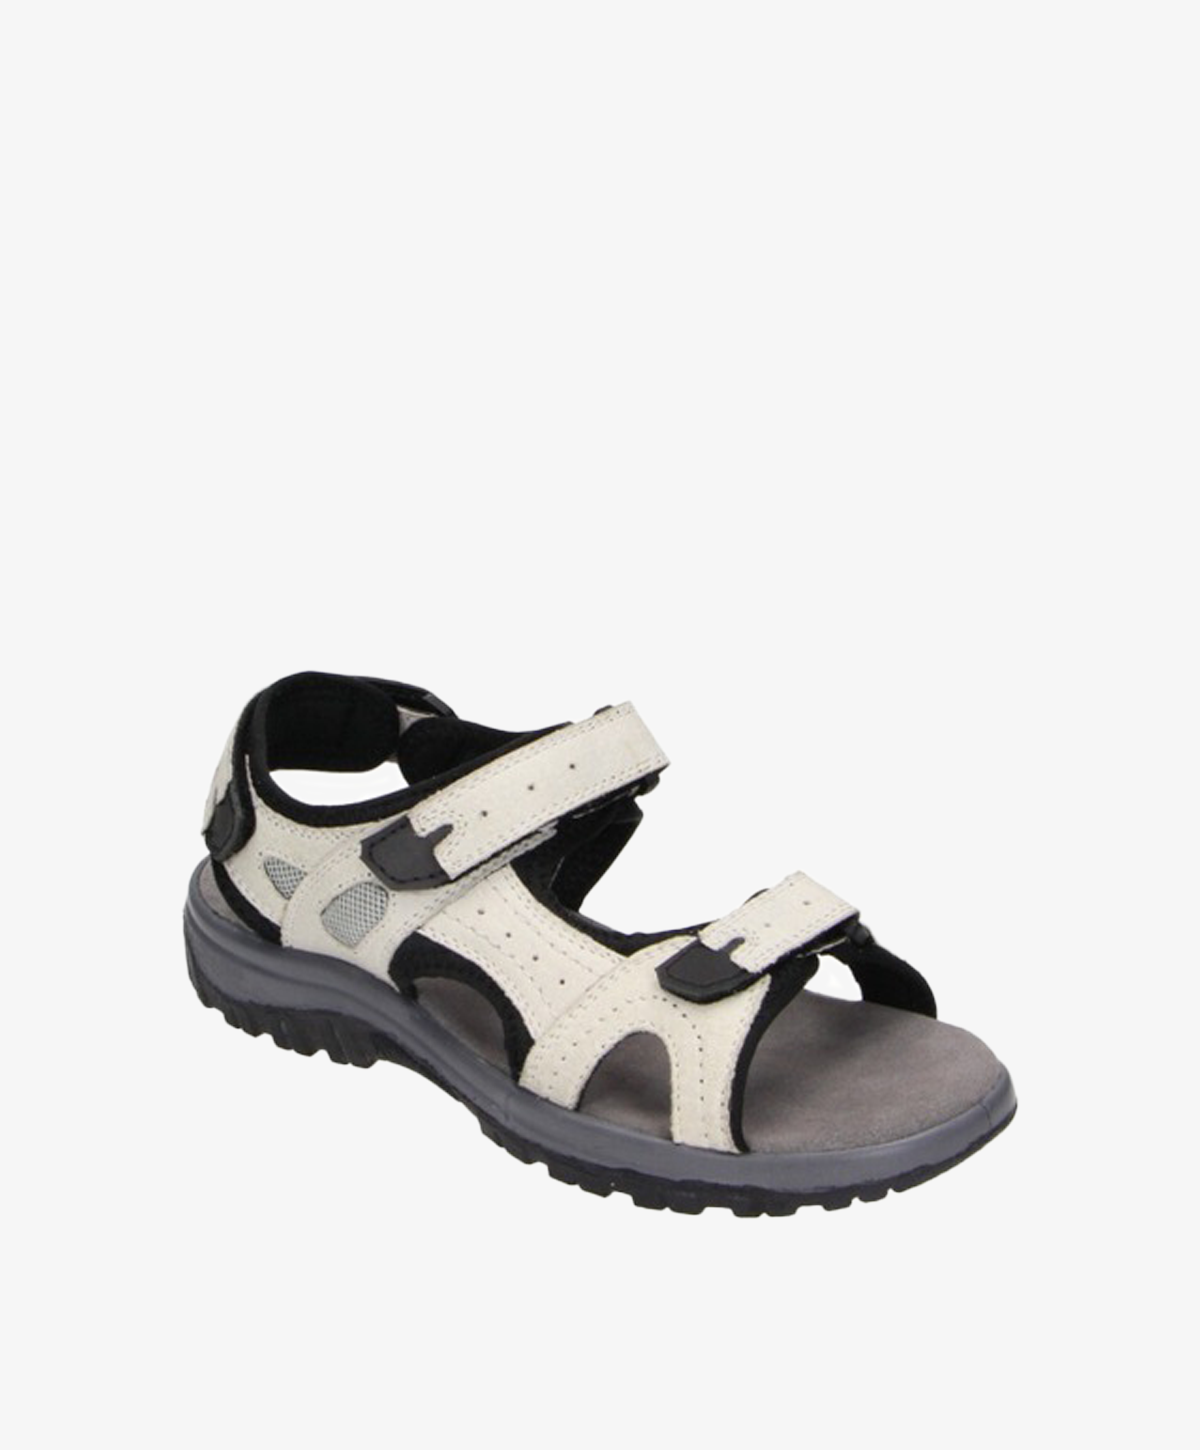 FOOTZONE - Dame Sandal - Offwhite Shoes